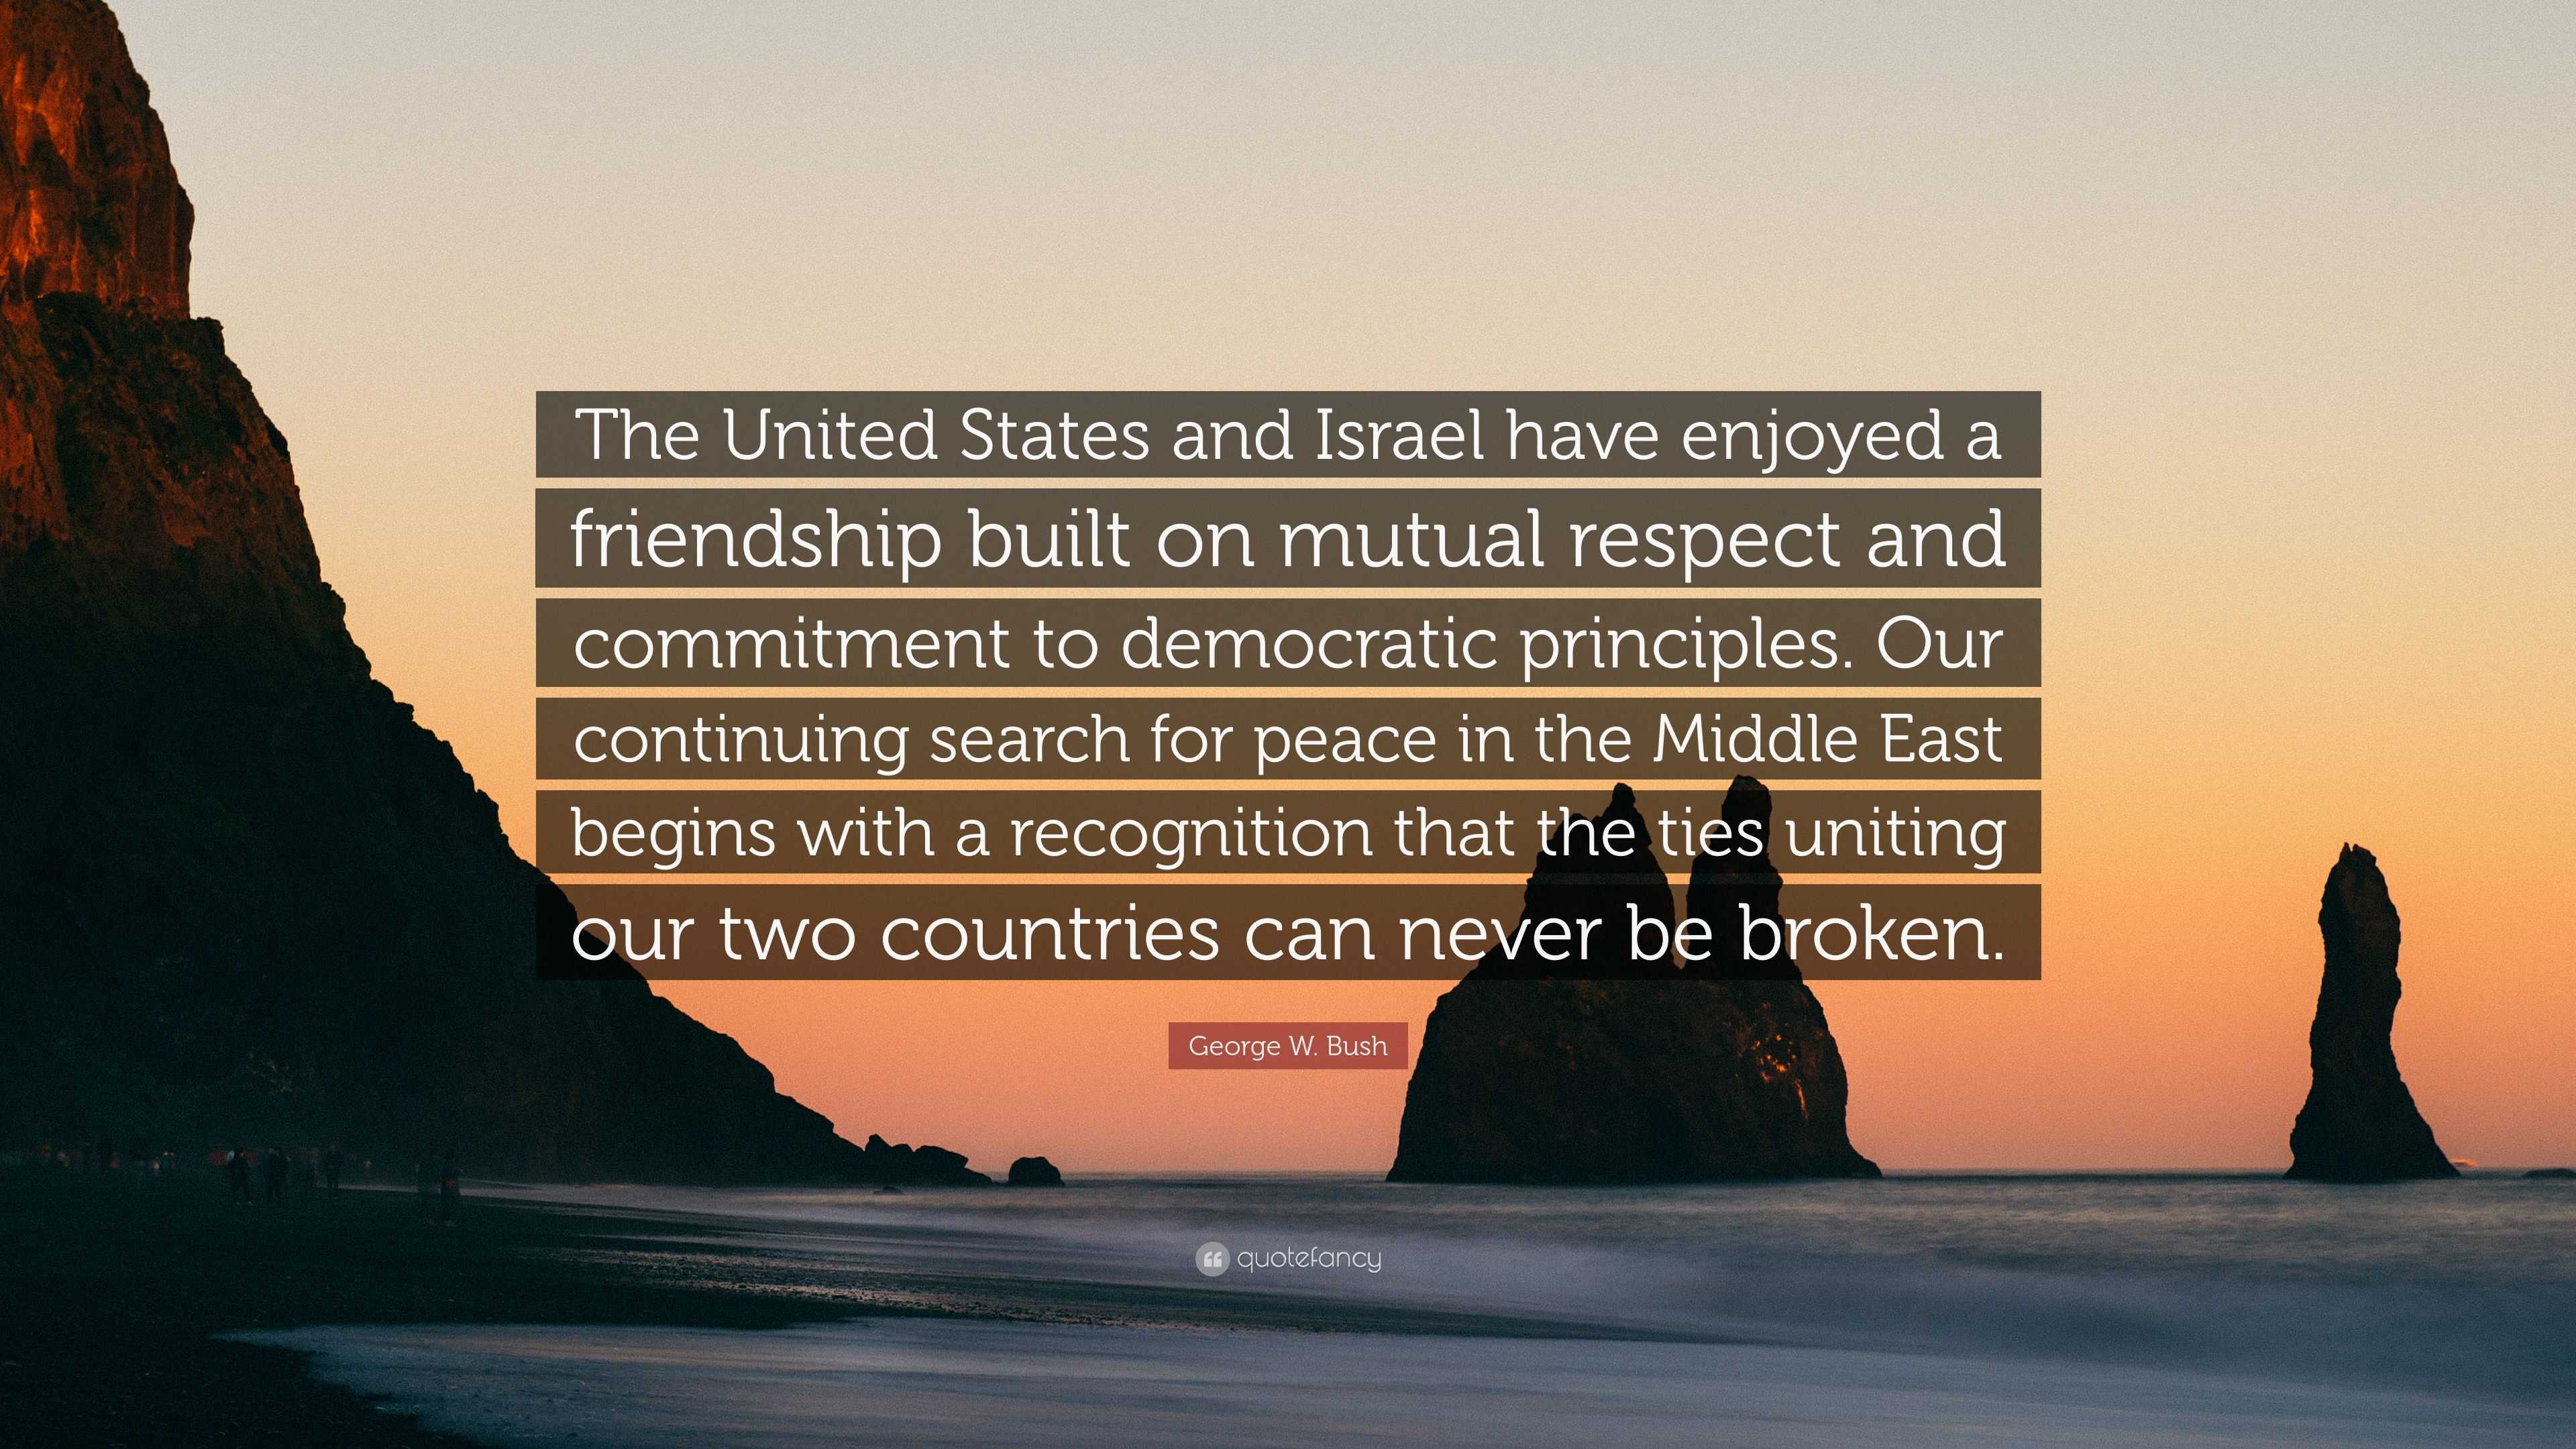 George W Bush Quote The United States And Israel Have Enjoyed A Friendship Built On Mutual Respect And Commitment To Democratic Principles 7 Wallpapers Quotefancy